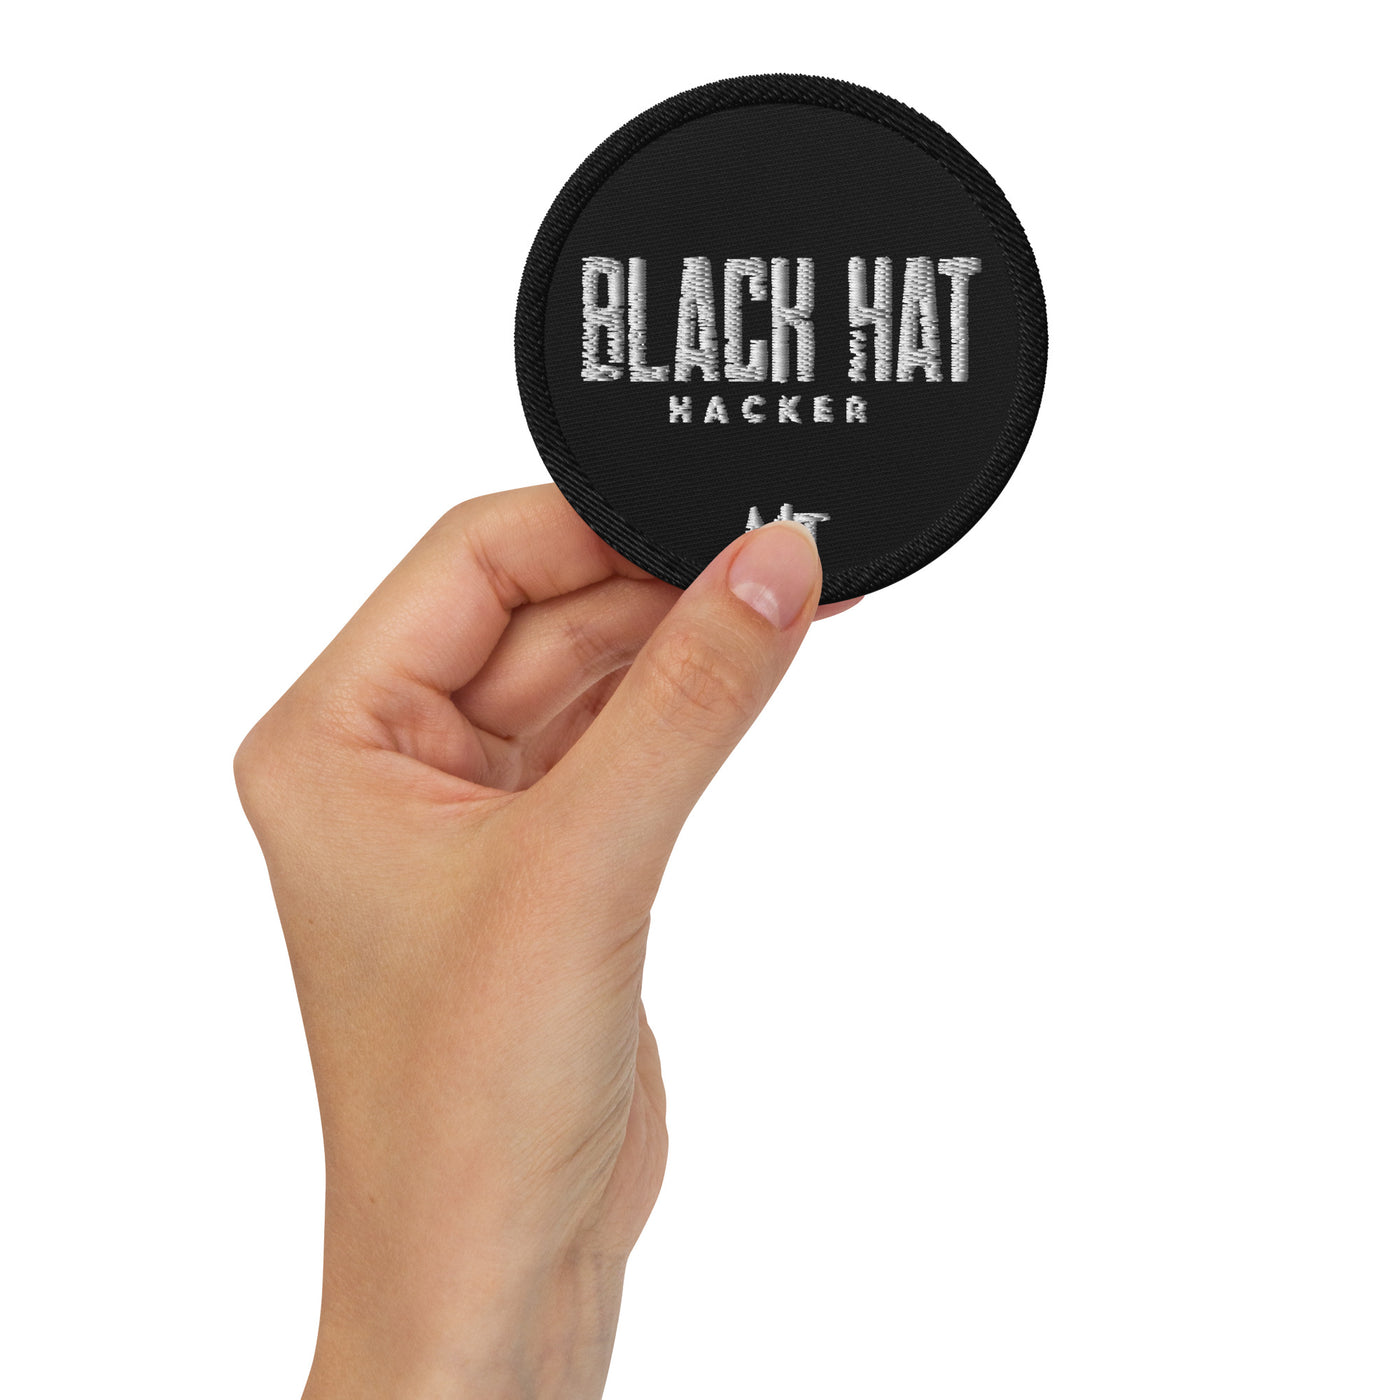 Black Hat Hacker V20 - Embroidered patches